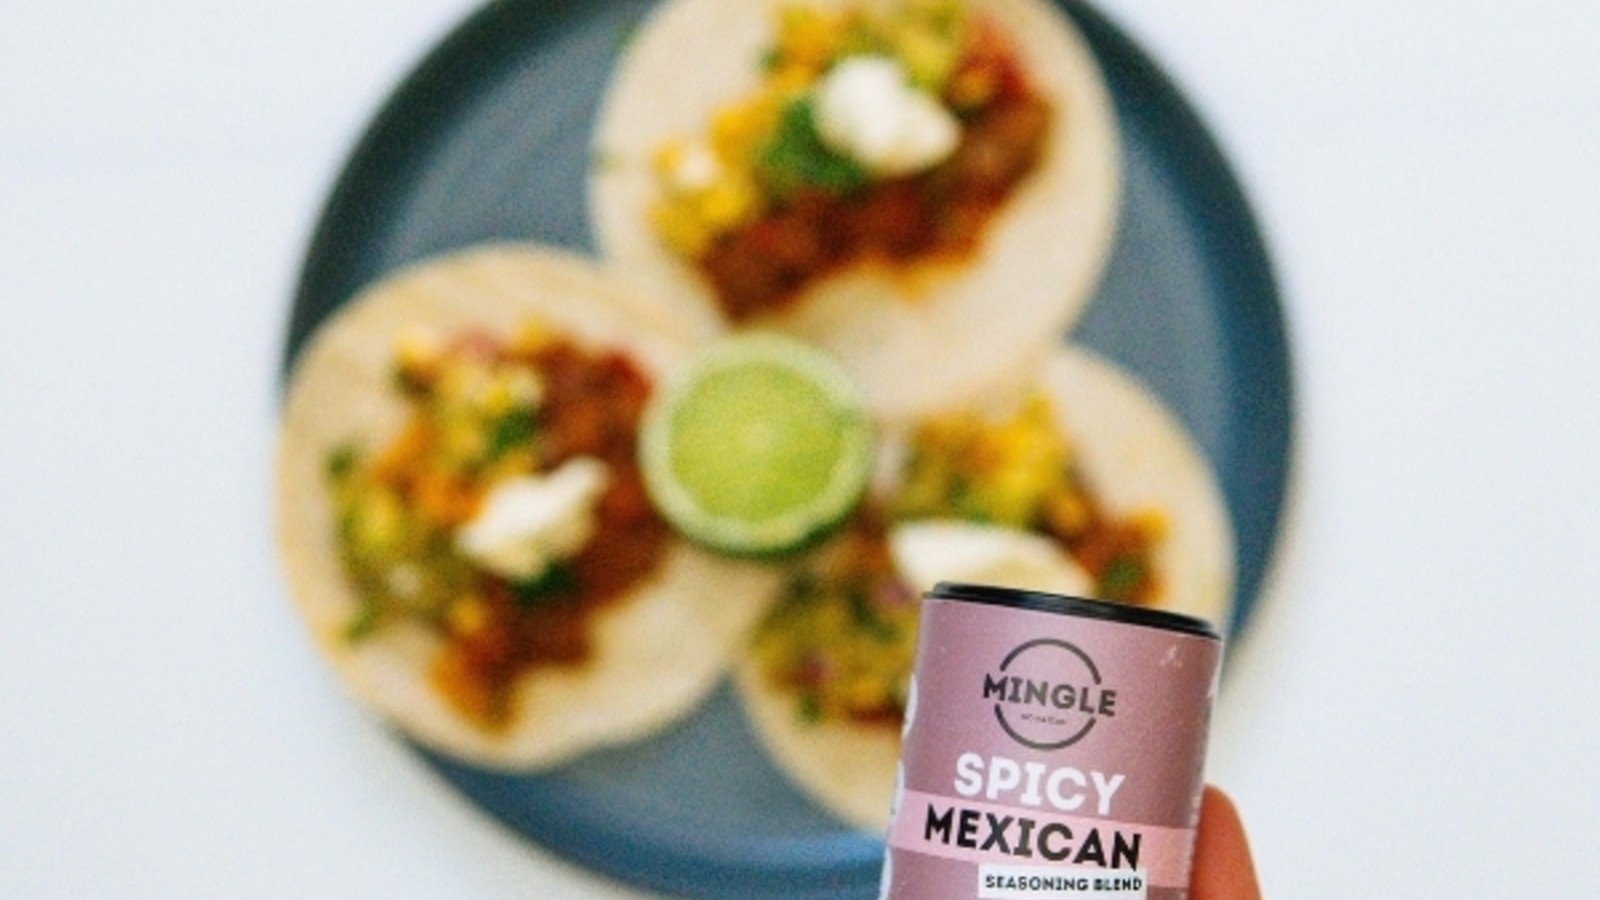 Image of Mingle's Spicy Mexican Quick Tacos